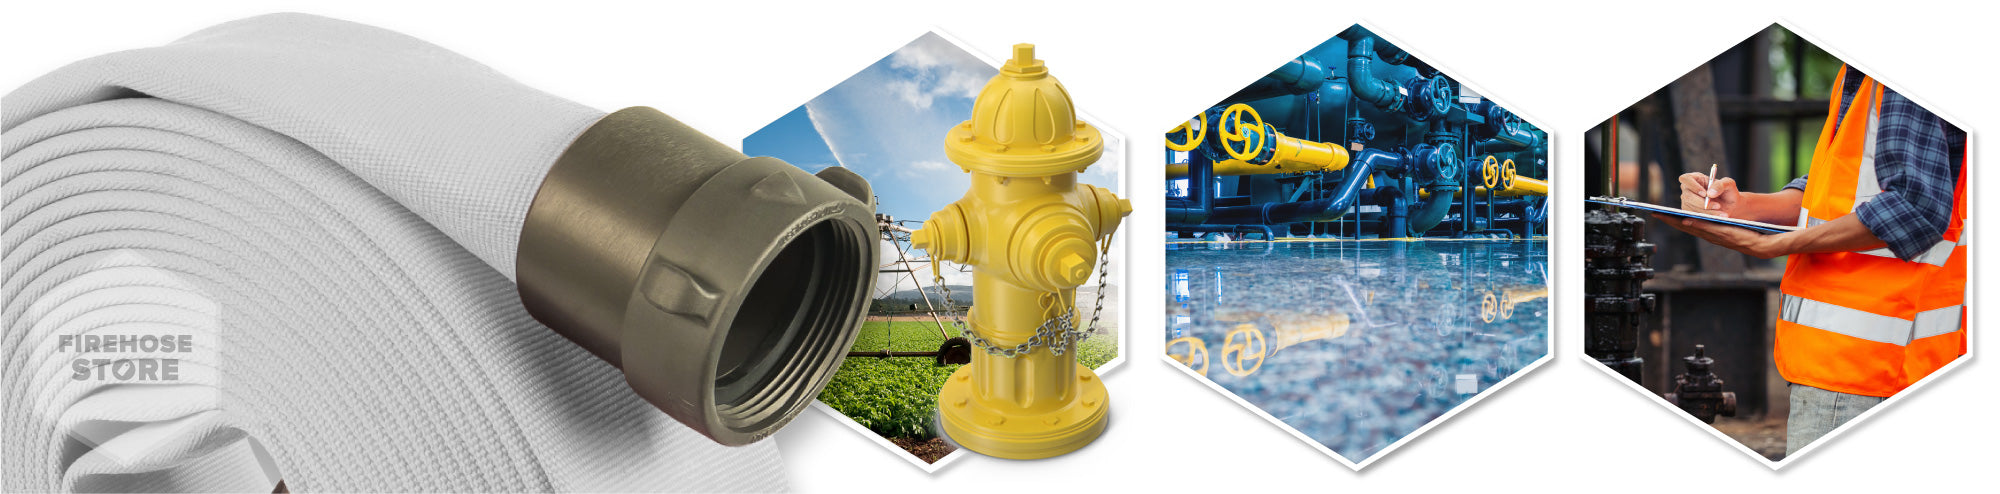 1-1-2 Inch x 100 Feet Fire Hydrant Hose Graphic Overview